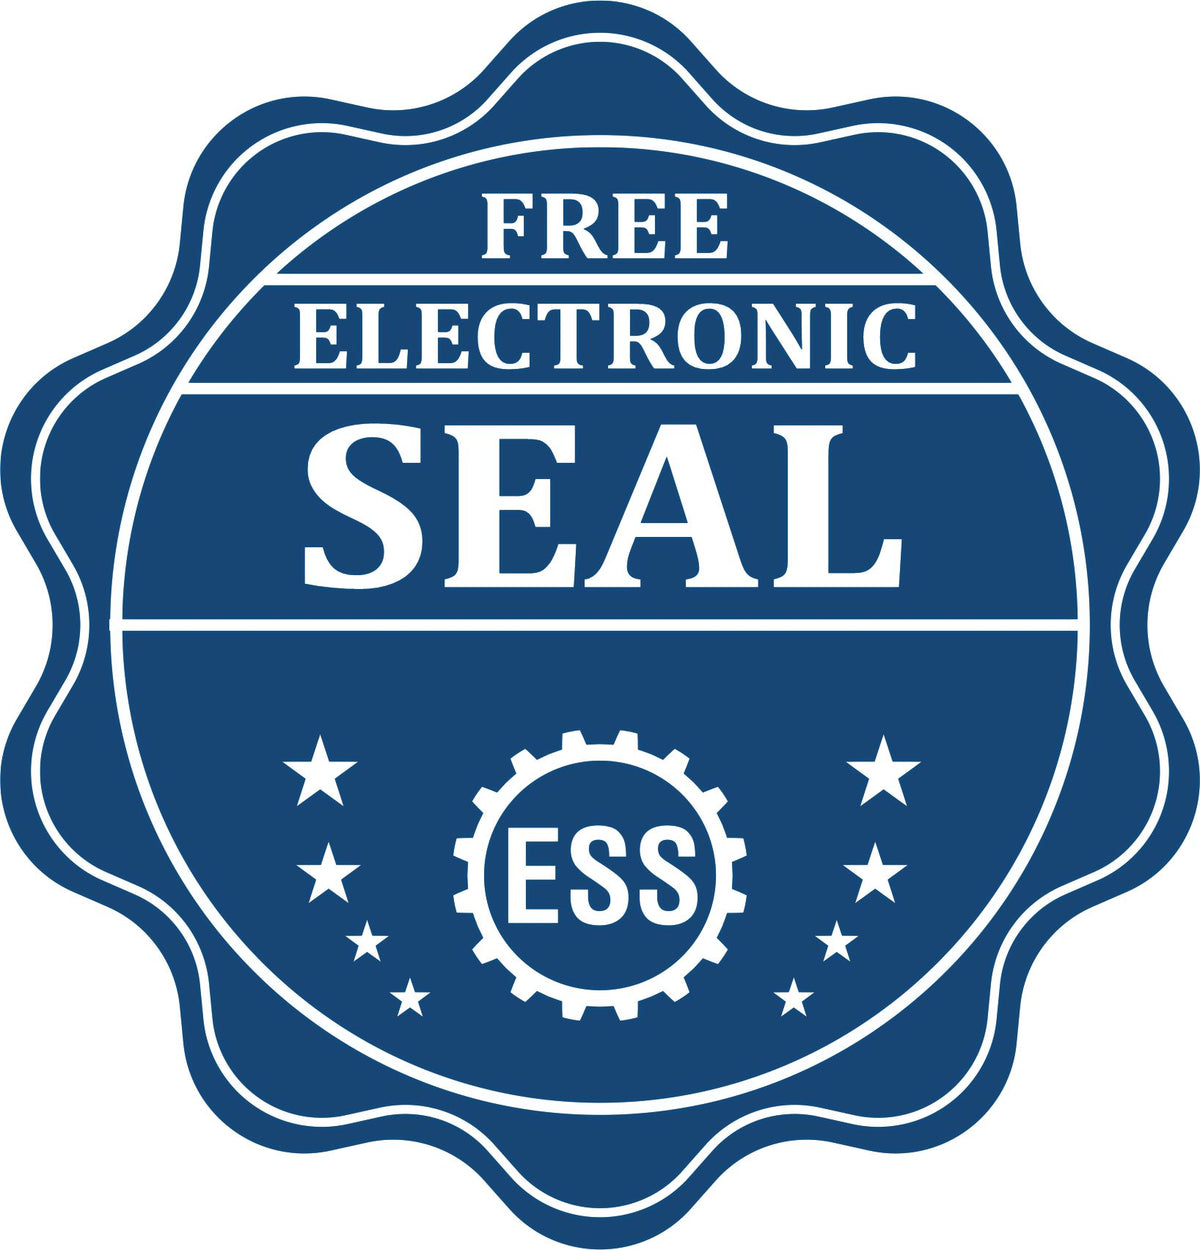 A badge showing a free electronic seal for the Long Reach Arizona Land Surveyor Seal with stars and the ESS gear on the emblem.